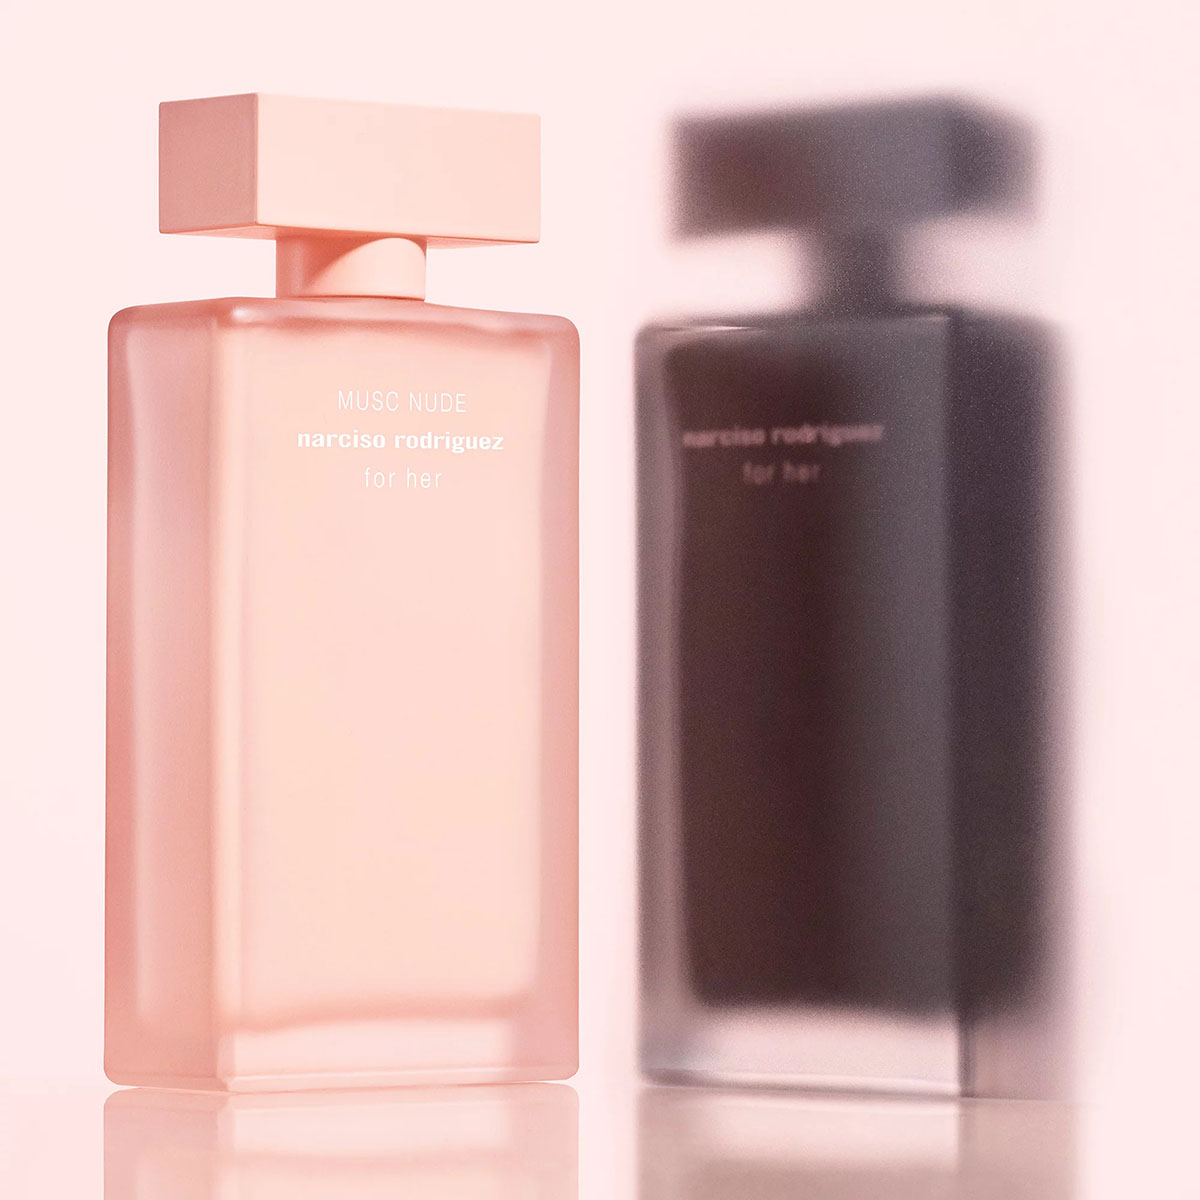 NƯỚC HOA NỮ NARCISO RODRIGUEZ MUSC NUDE FOR HER EDP 6